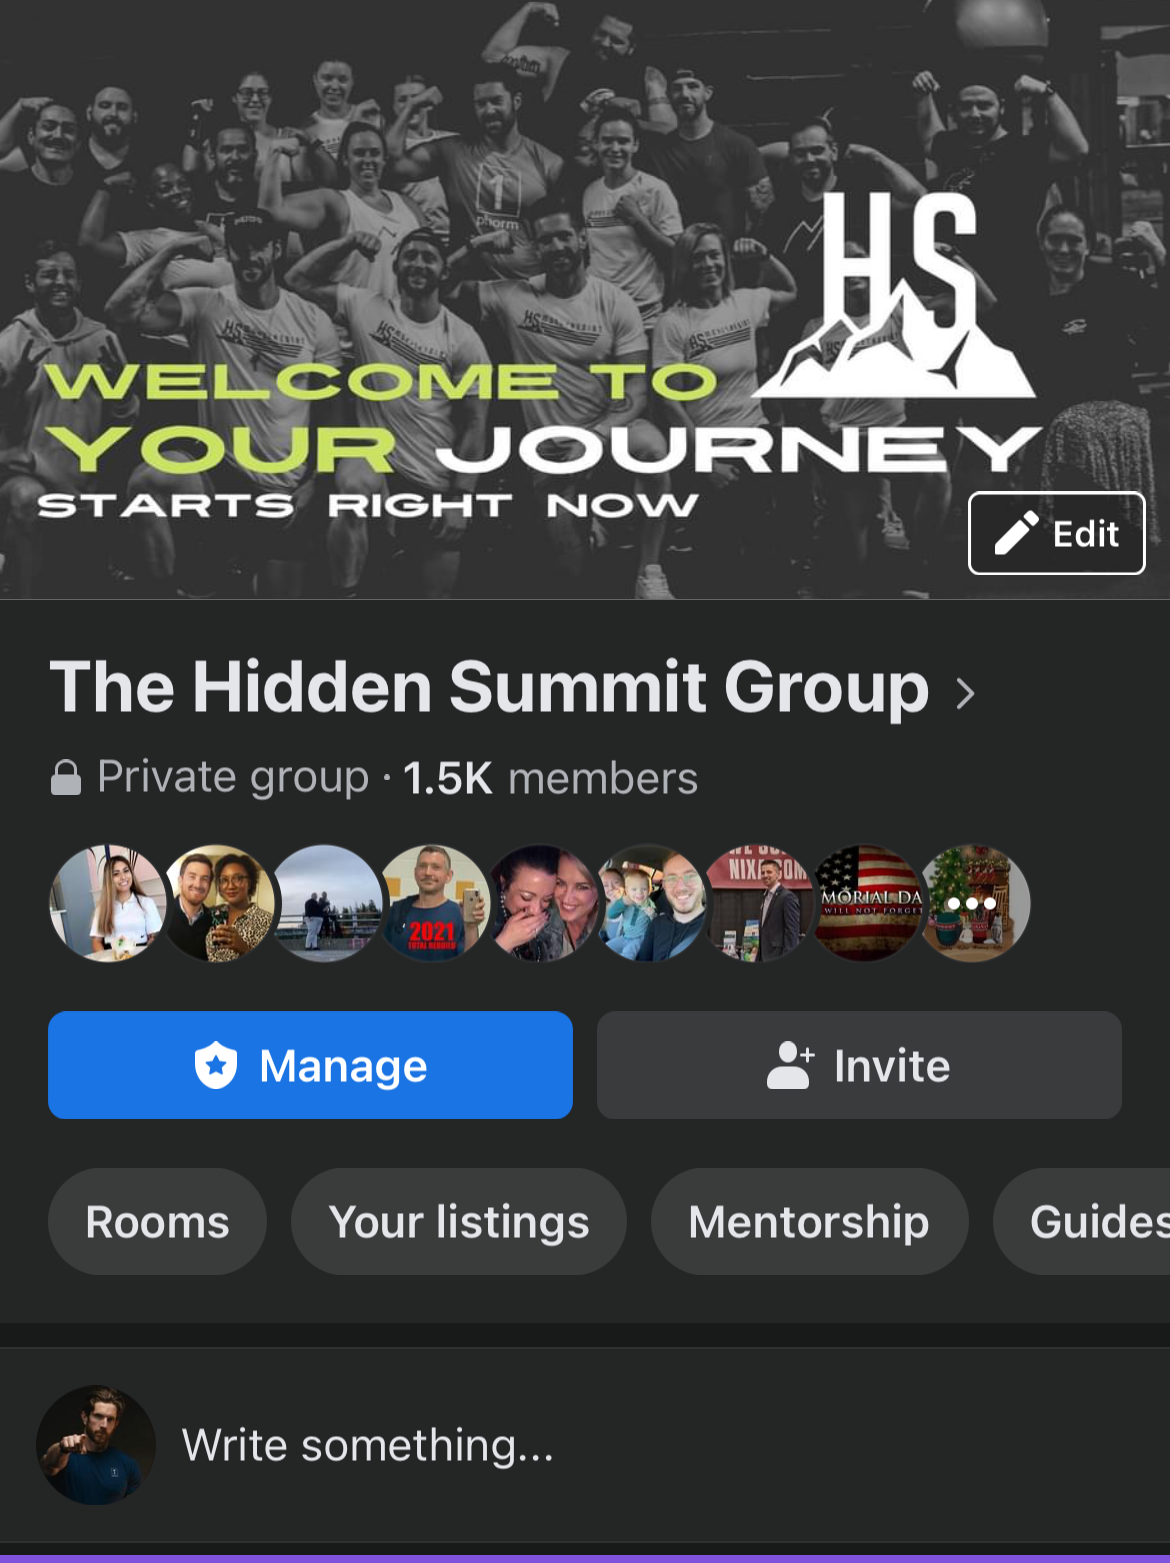 A facebook page for the hidden summit group